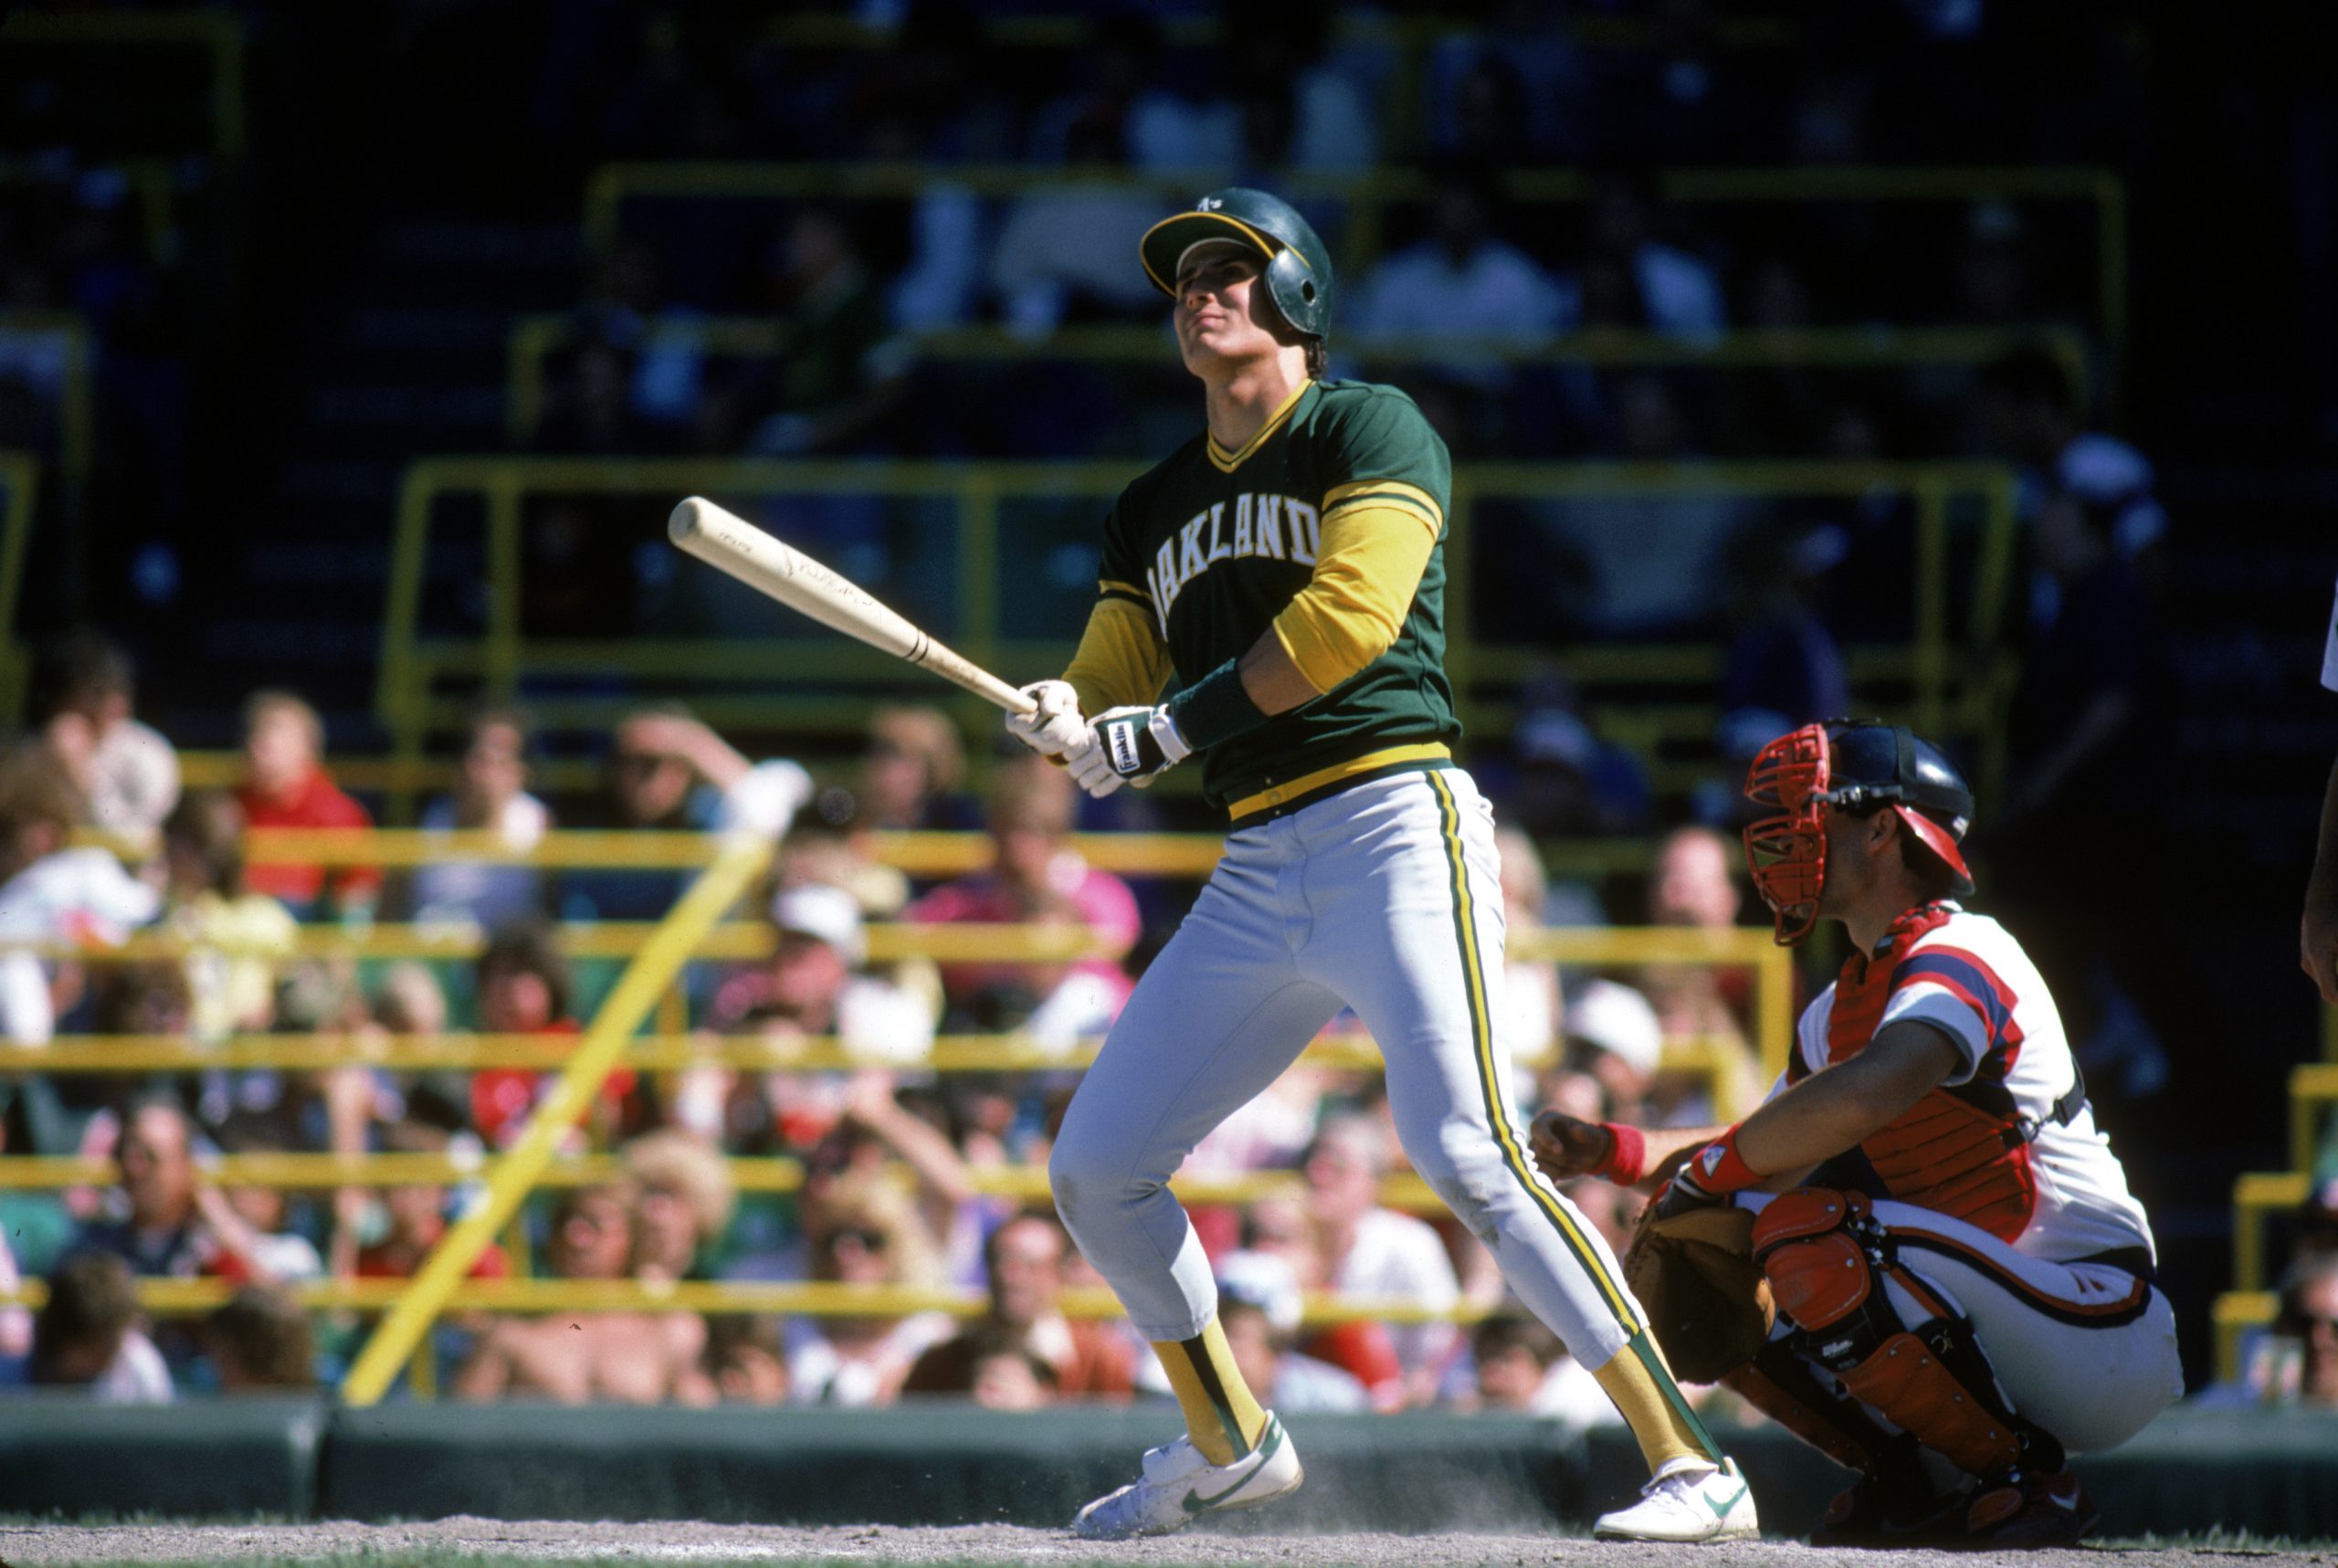 ose Canseco of the Oakland Athletics bats during an MLB game at Comiskey Park.